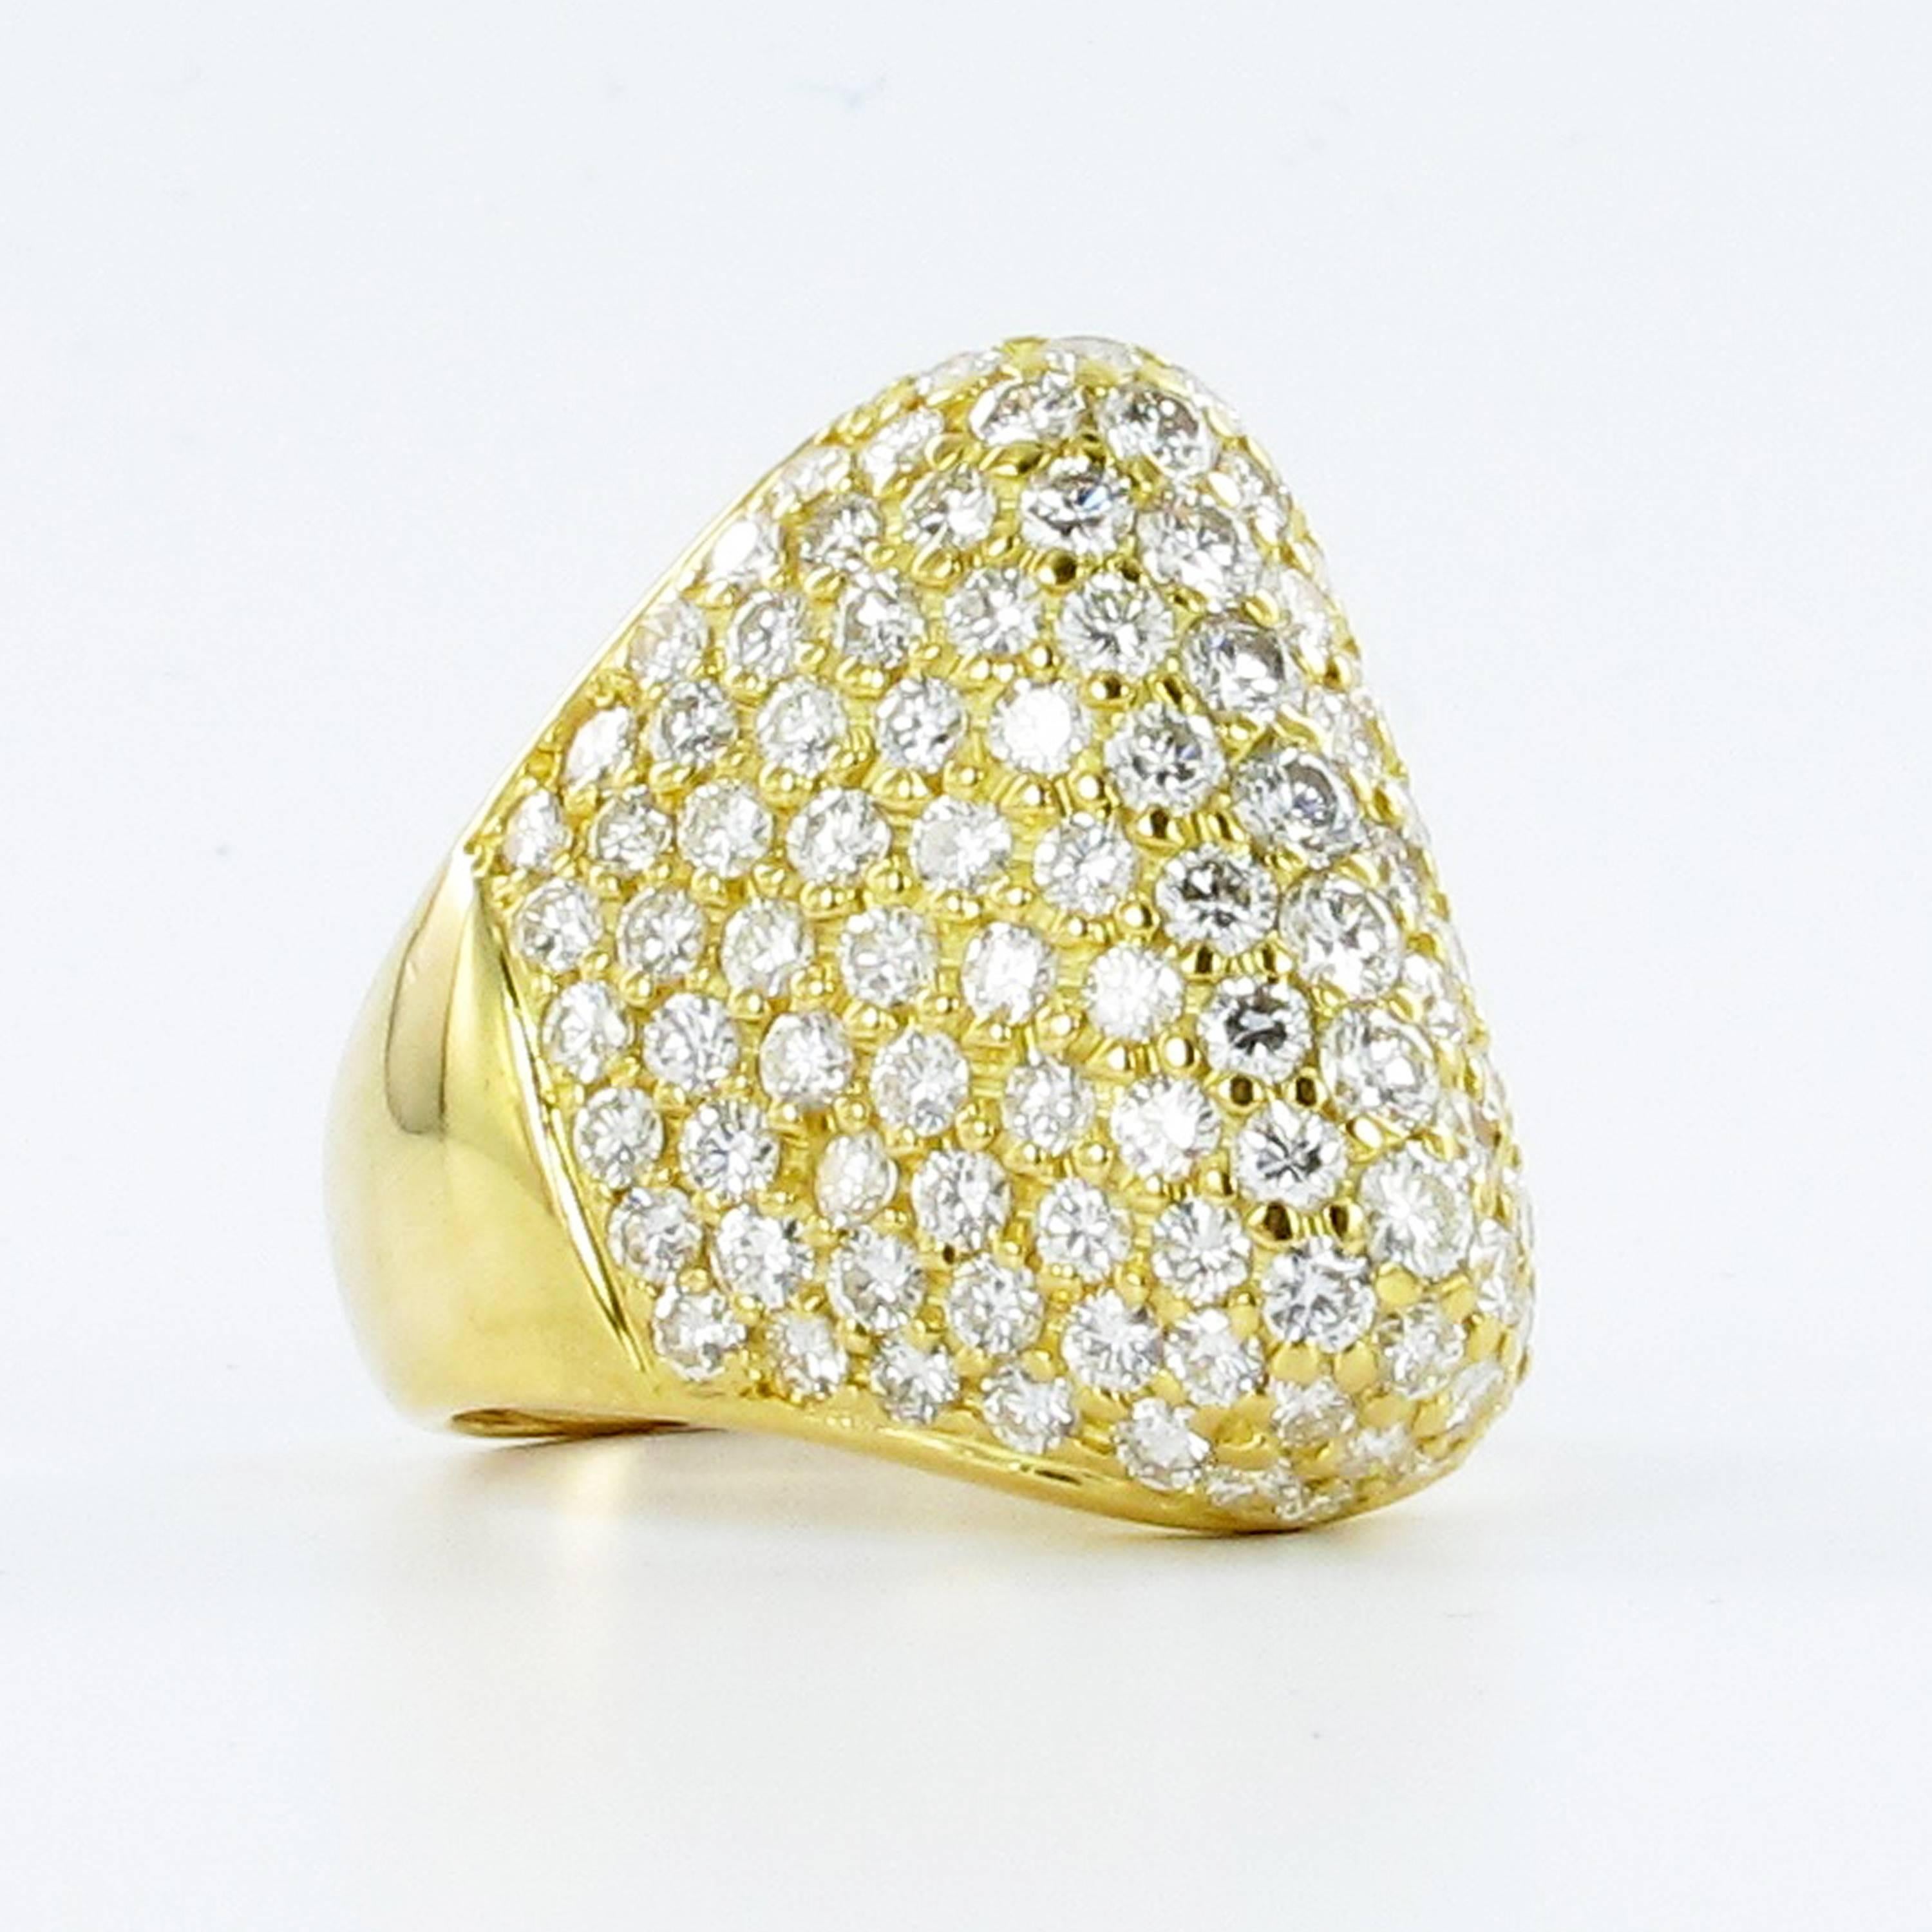 Diamond Dome ring in yellow gold 750. Pavé set with 137 brilliant cut diamonds totaling approximate 4.00 ct. Diamonds of G/H color and si clarity. The ring is in very good conditon and is freshly polished.

Size: 54.5 - US 7 1/4 (including spring